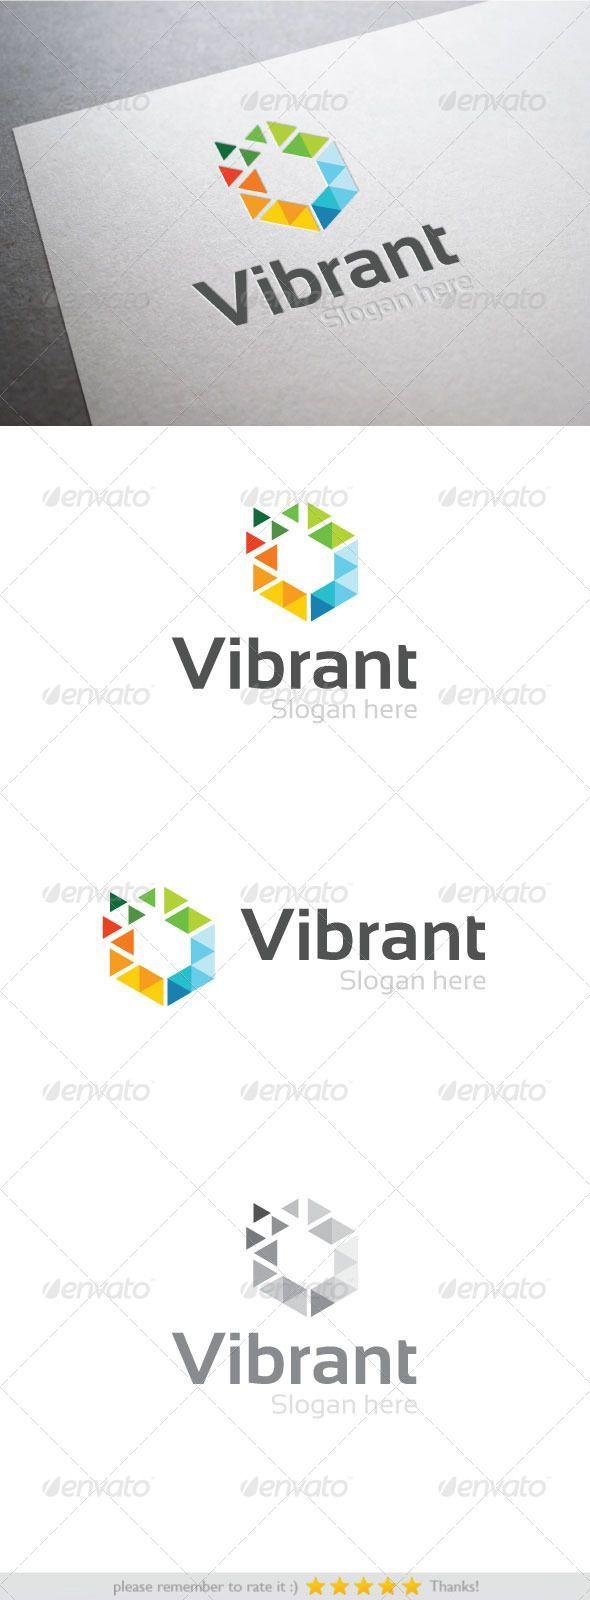 Vibrant Logo - Pin by Bashooka Web & Graphic Design on Abstract Logo Template ...